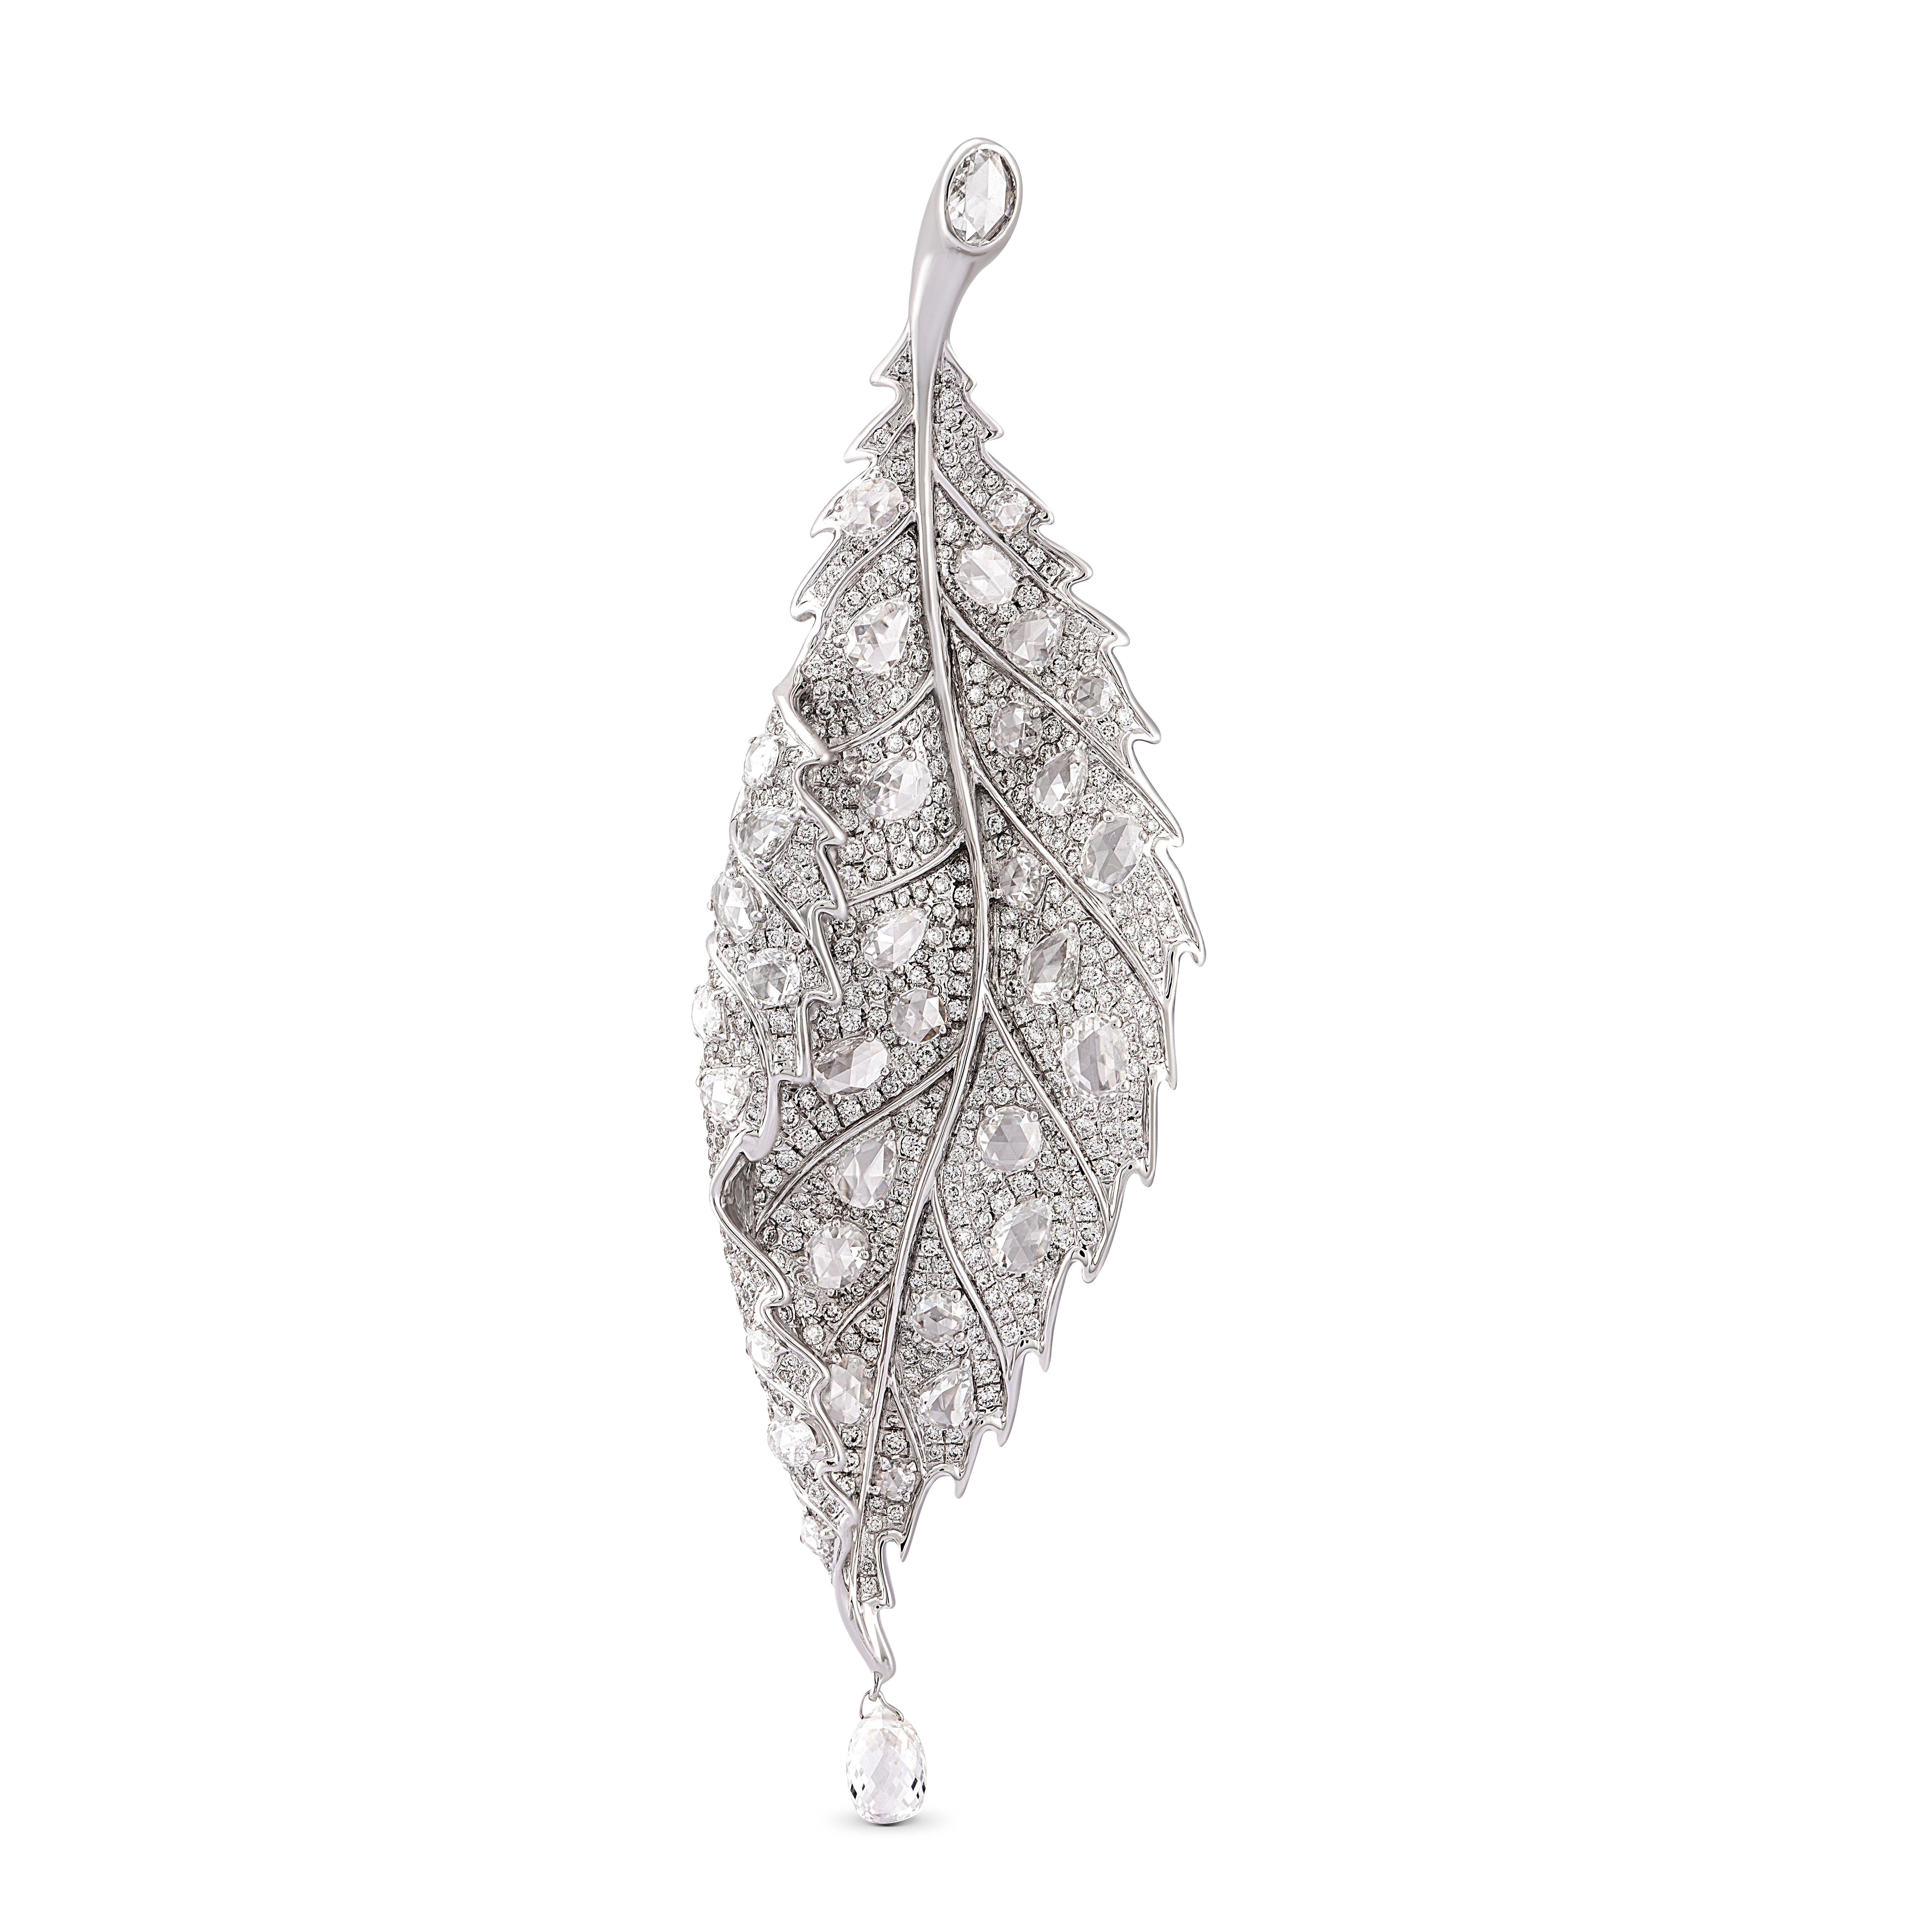 This stylised brooch is intricately crafted with 33 rose-cut and 569 pave set round brilliant diamonds. A single 0.57ct briolette cut diamond represents a drop of morning dew, giving an air of realism to this otherwise whimsical jewel. 

Total